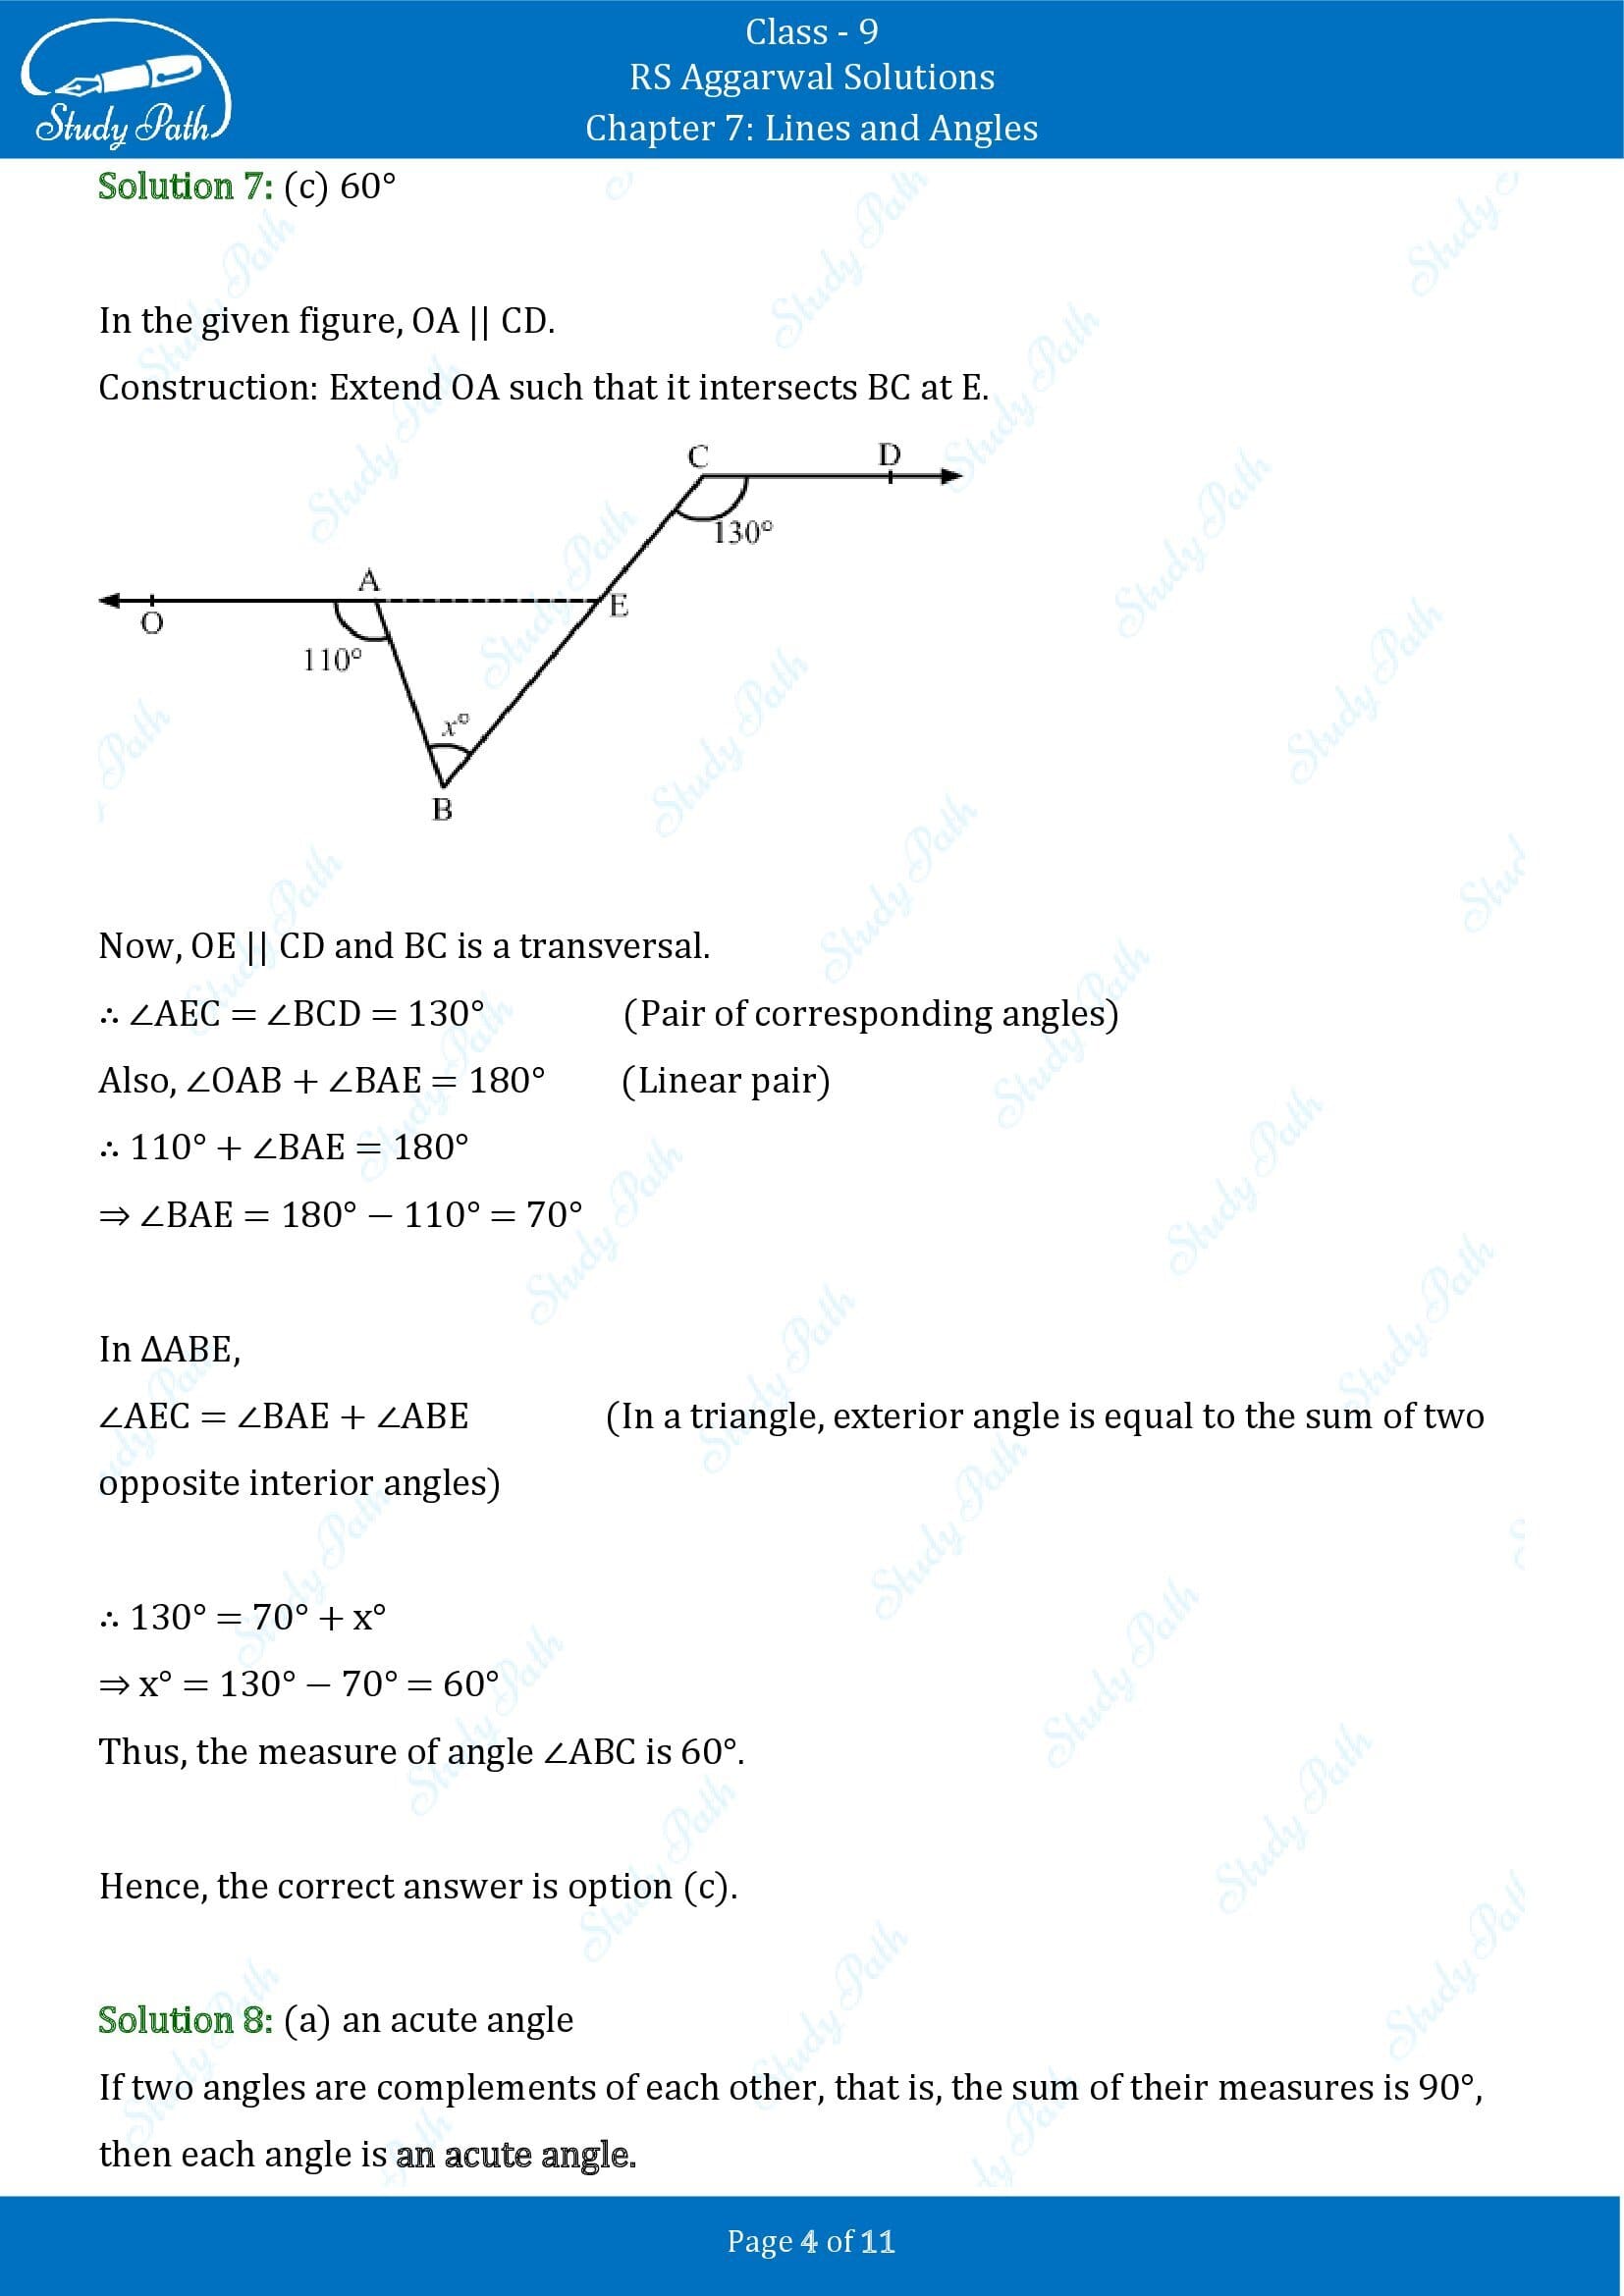 RS Aggarwal Solutions Class 9 Chapter 7 Lines and Angles Multiple Choice Questions MCQs 00004